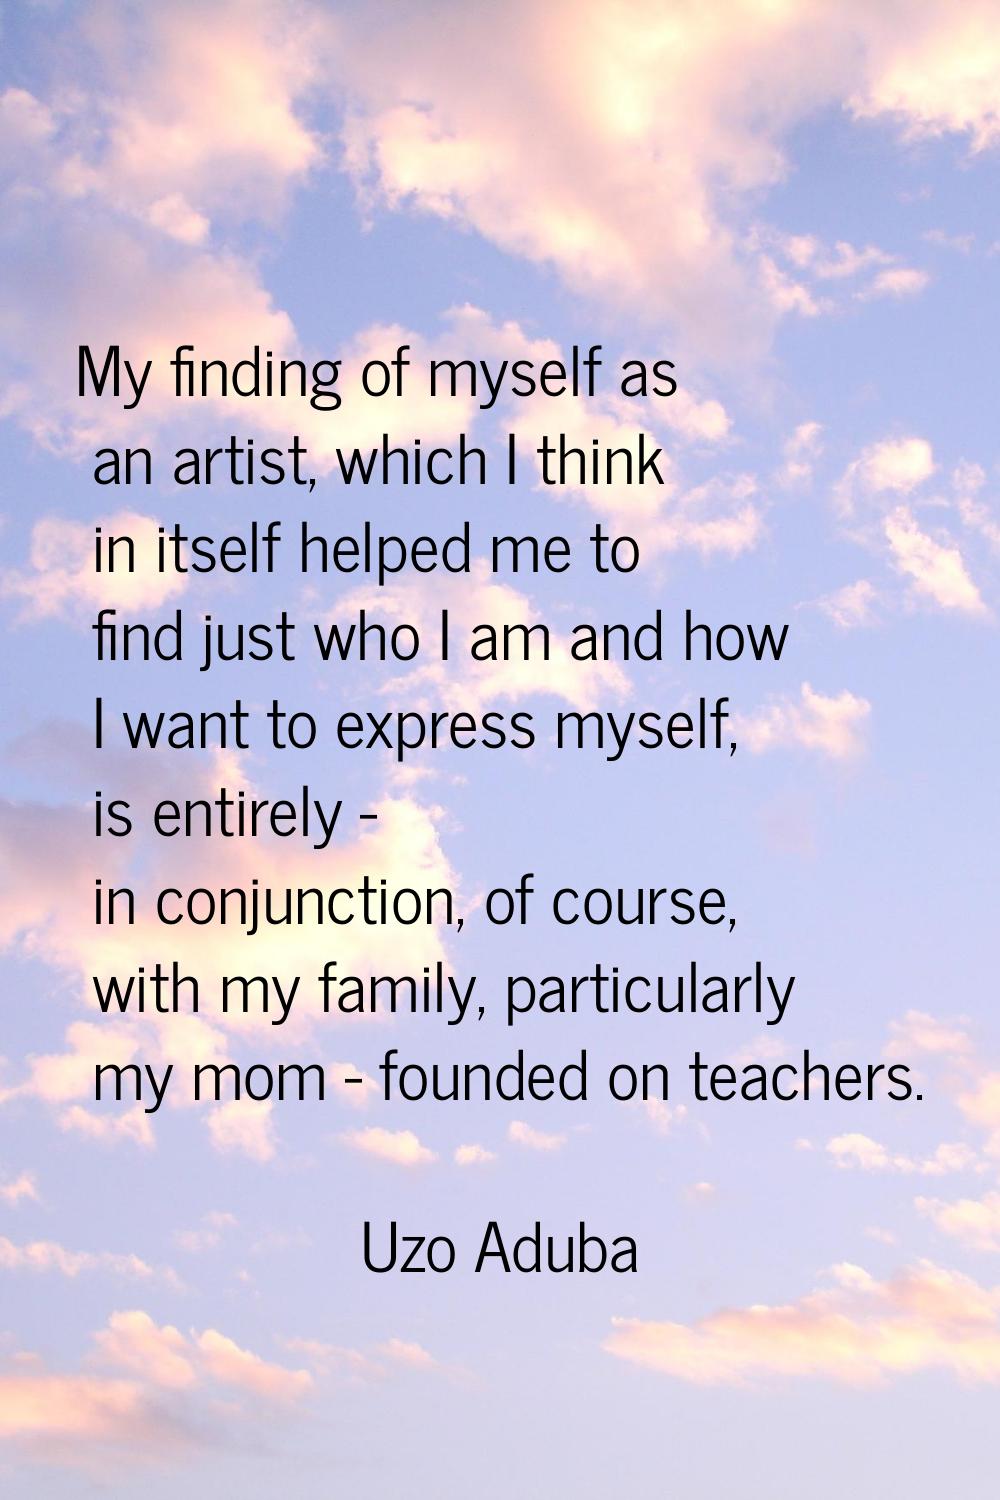 My finding of myself as an artist, which I think in itself helped me to find just who I am and how 